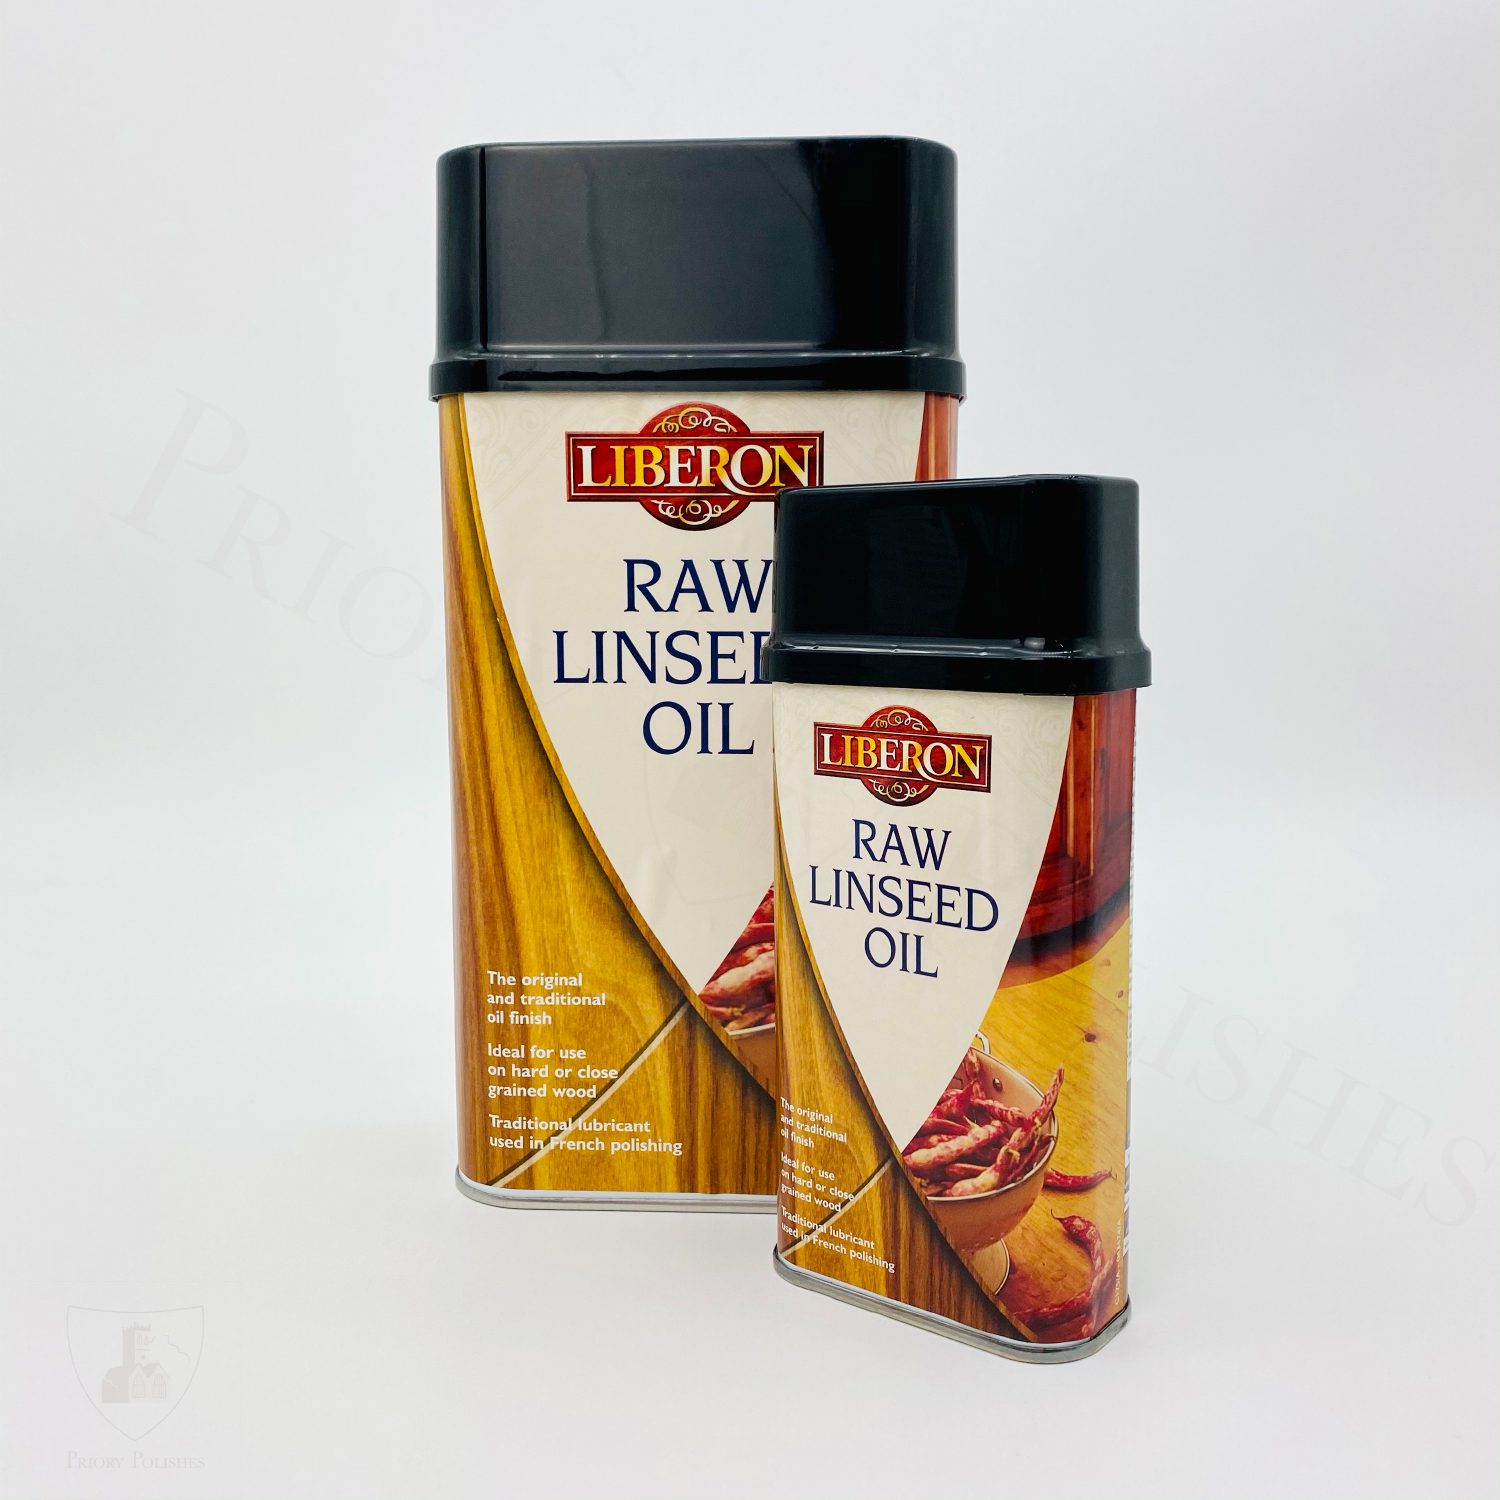 Pure Raw Linseed Oil (1 LTR) An Ideal Wood Finishing Oil for Bare